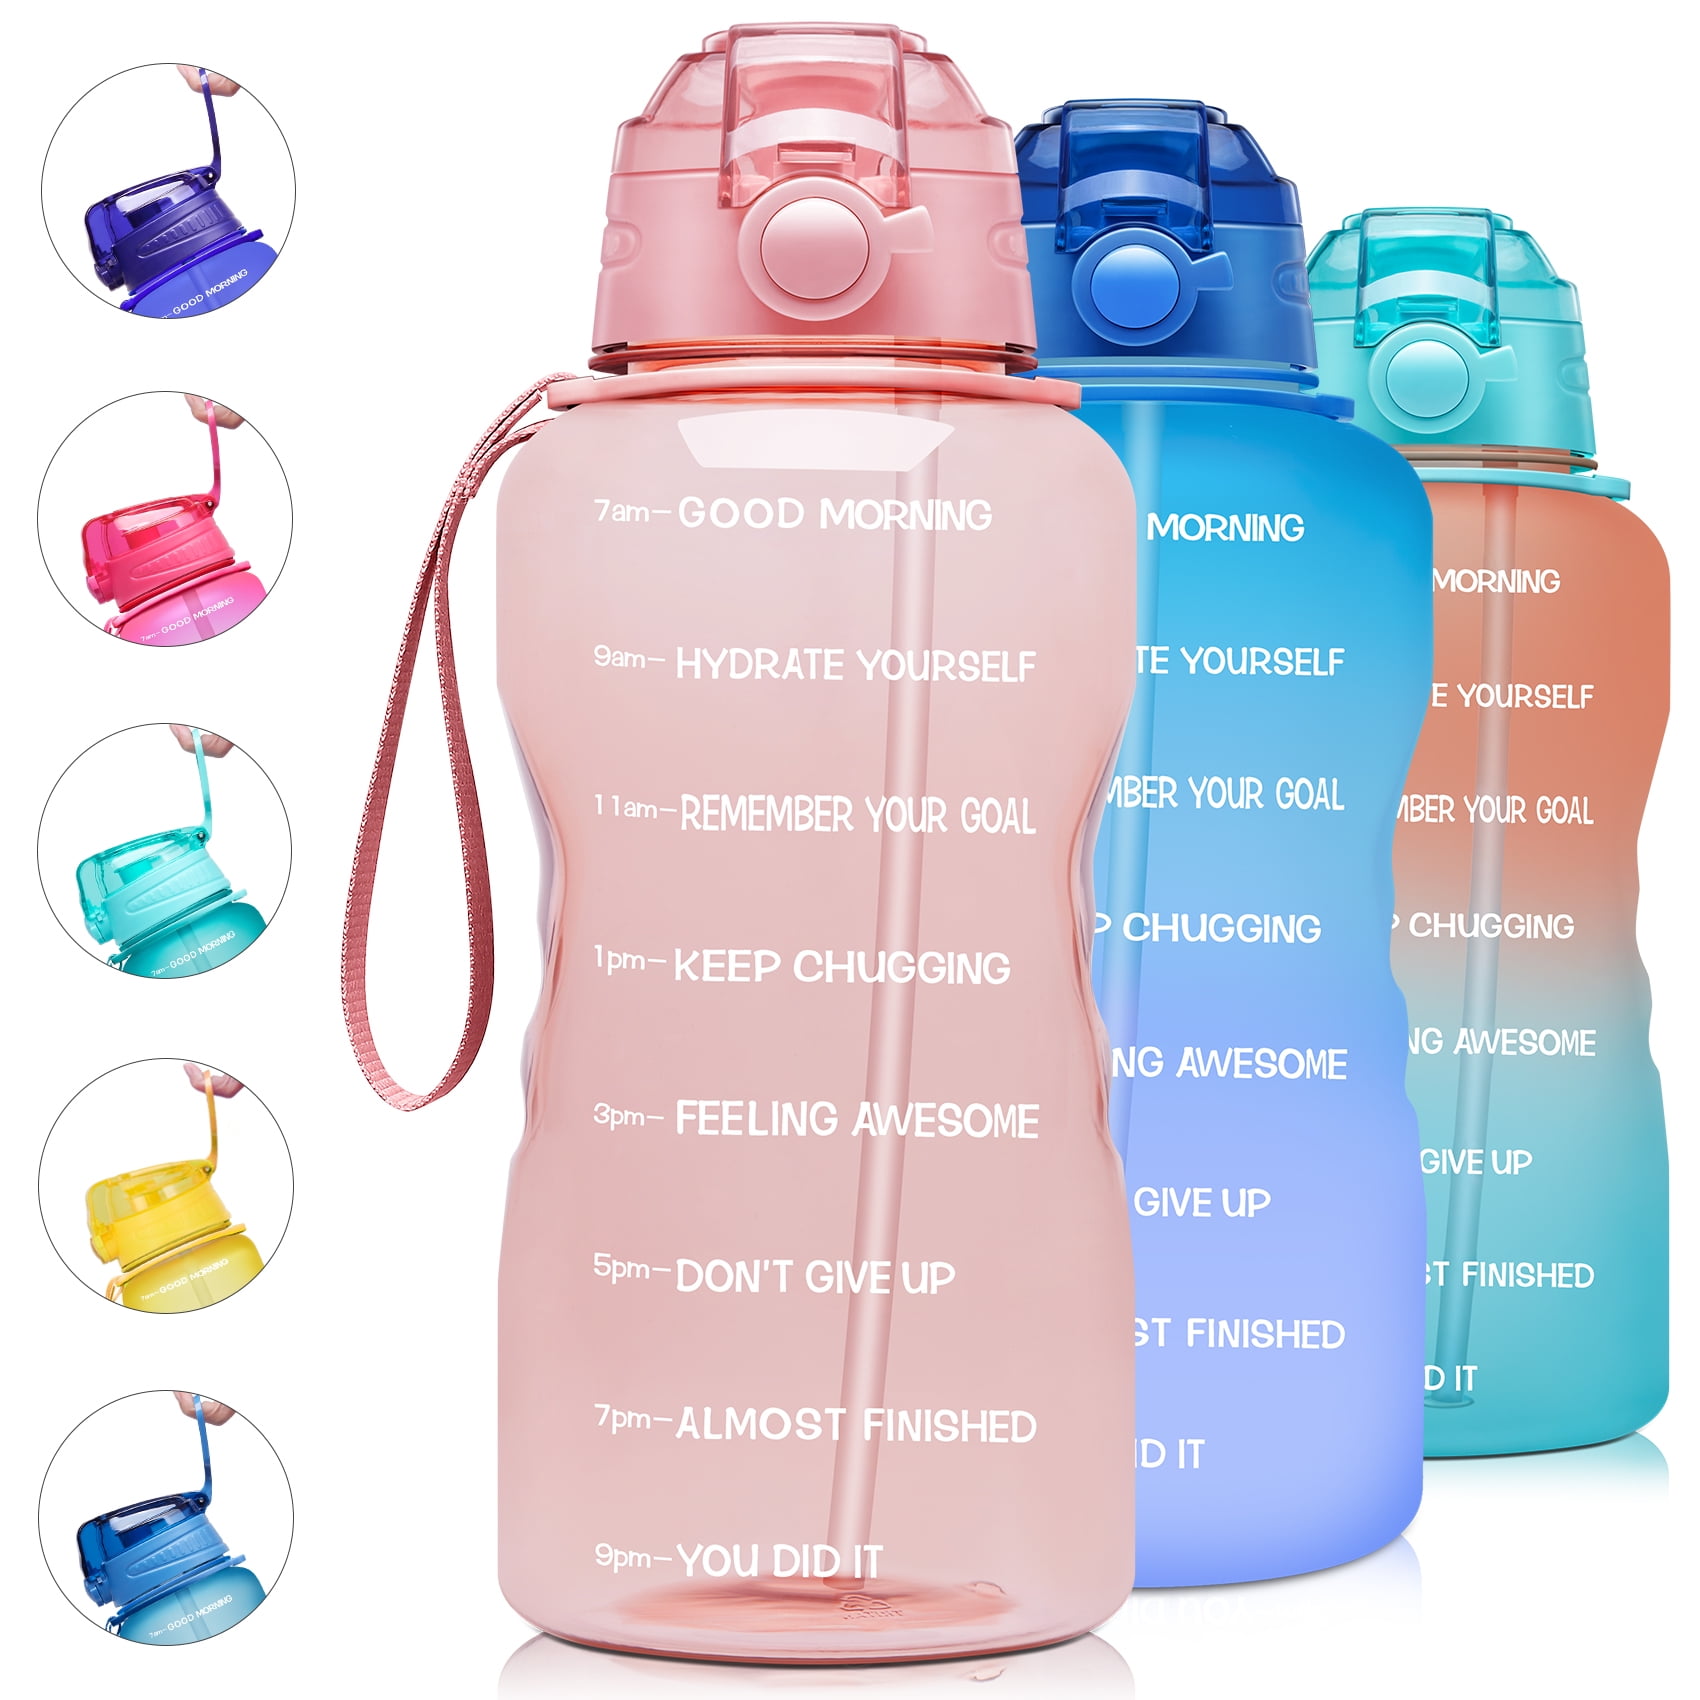 Leakproof BPA Free Water Jug to Remind You Drink More Water Hydrate in Style Giotto Large Half Gallon/64oz Motivational Water Bottle with Time Marker & Removable Strainer 